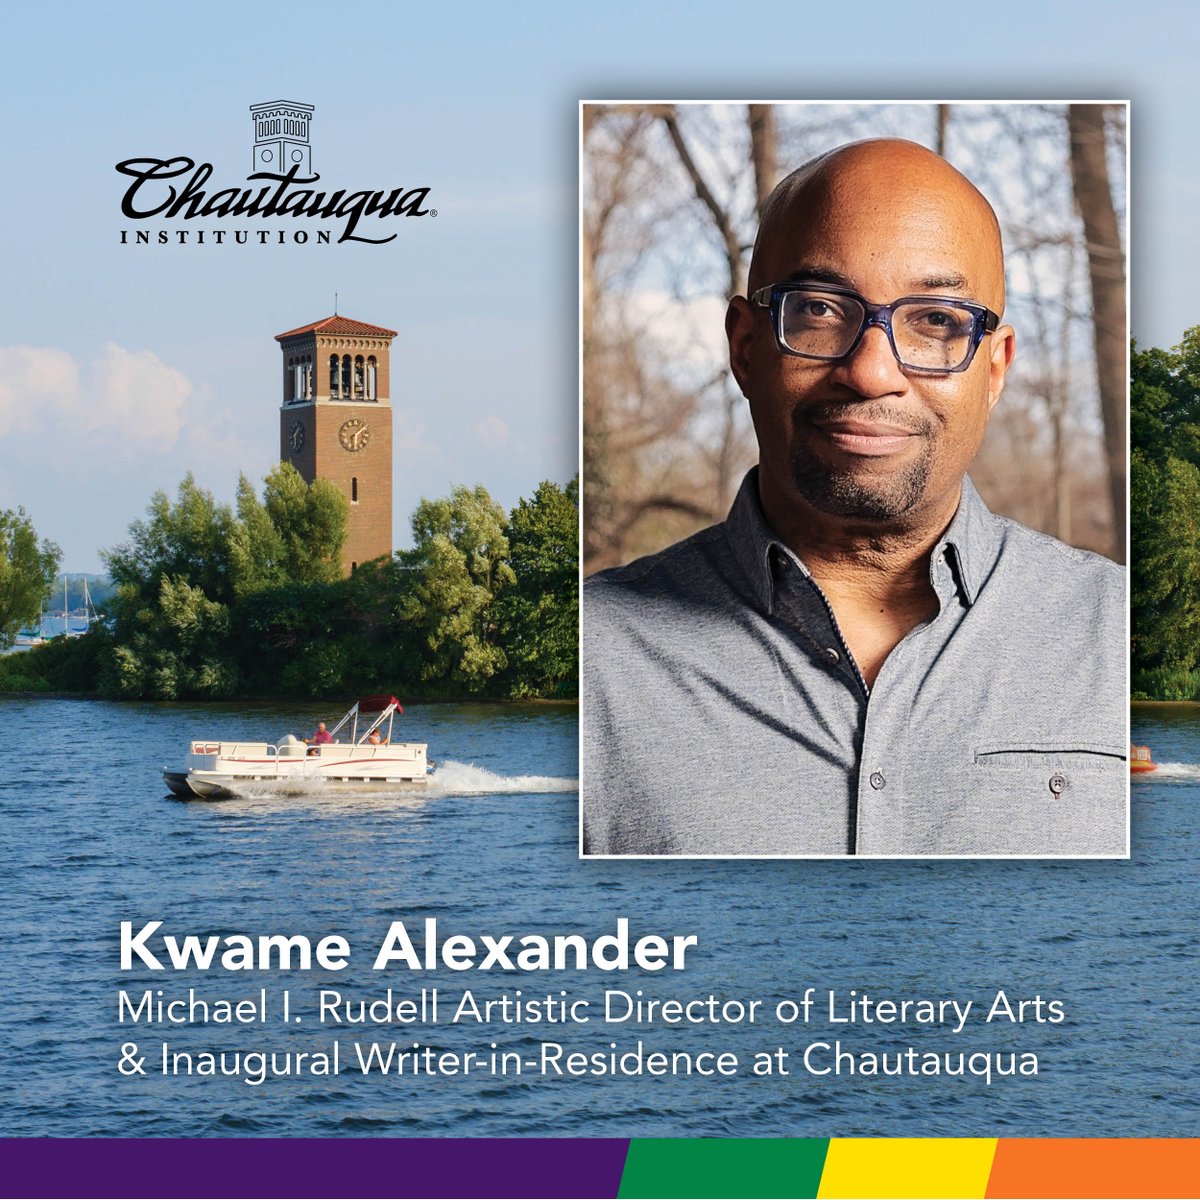 🚨#CLA2024 Announcement🚨 @kwamealexander has been named Michael I. Rudell Artistic Director of Literary Arts and Inaugural Writer-in-Residence. Alexander made his Chautauqua debut in our 2023 CLS. The author of 40 books, his work has also been featured in Battle of the Books.